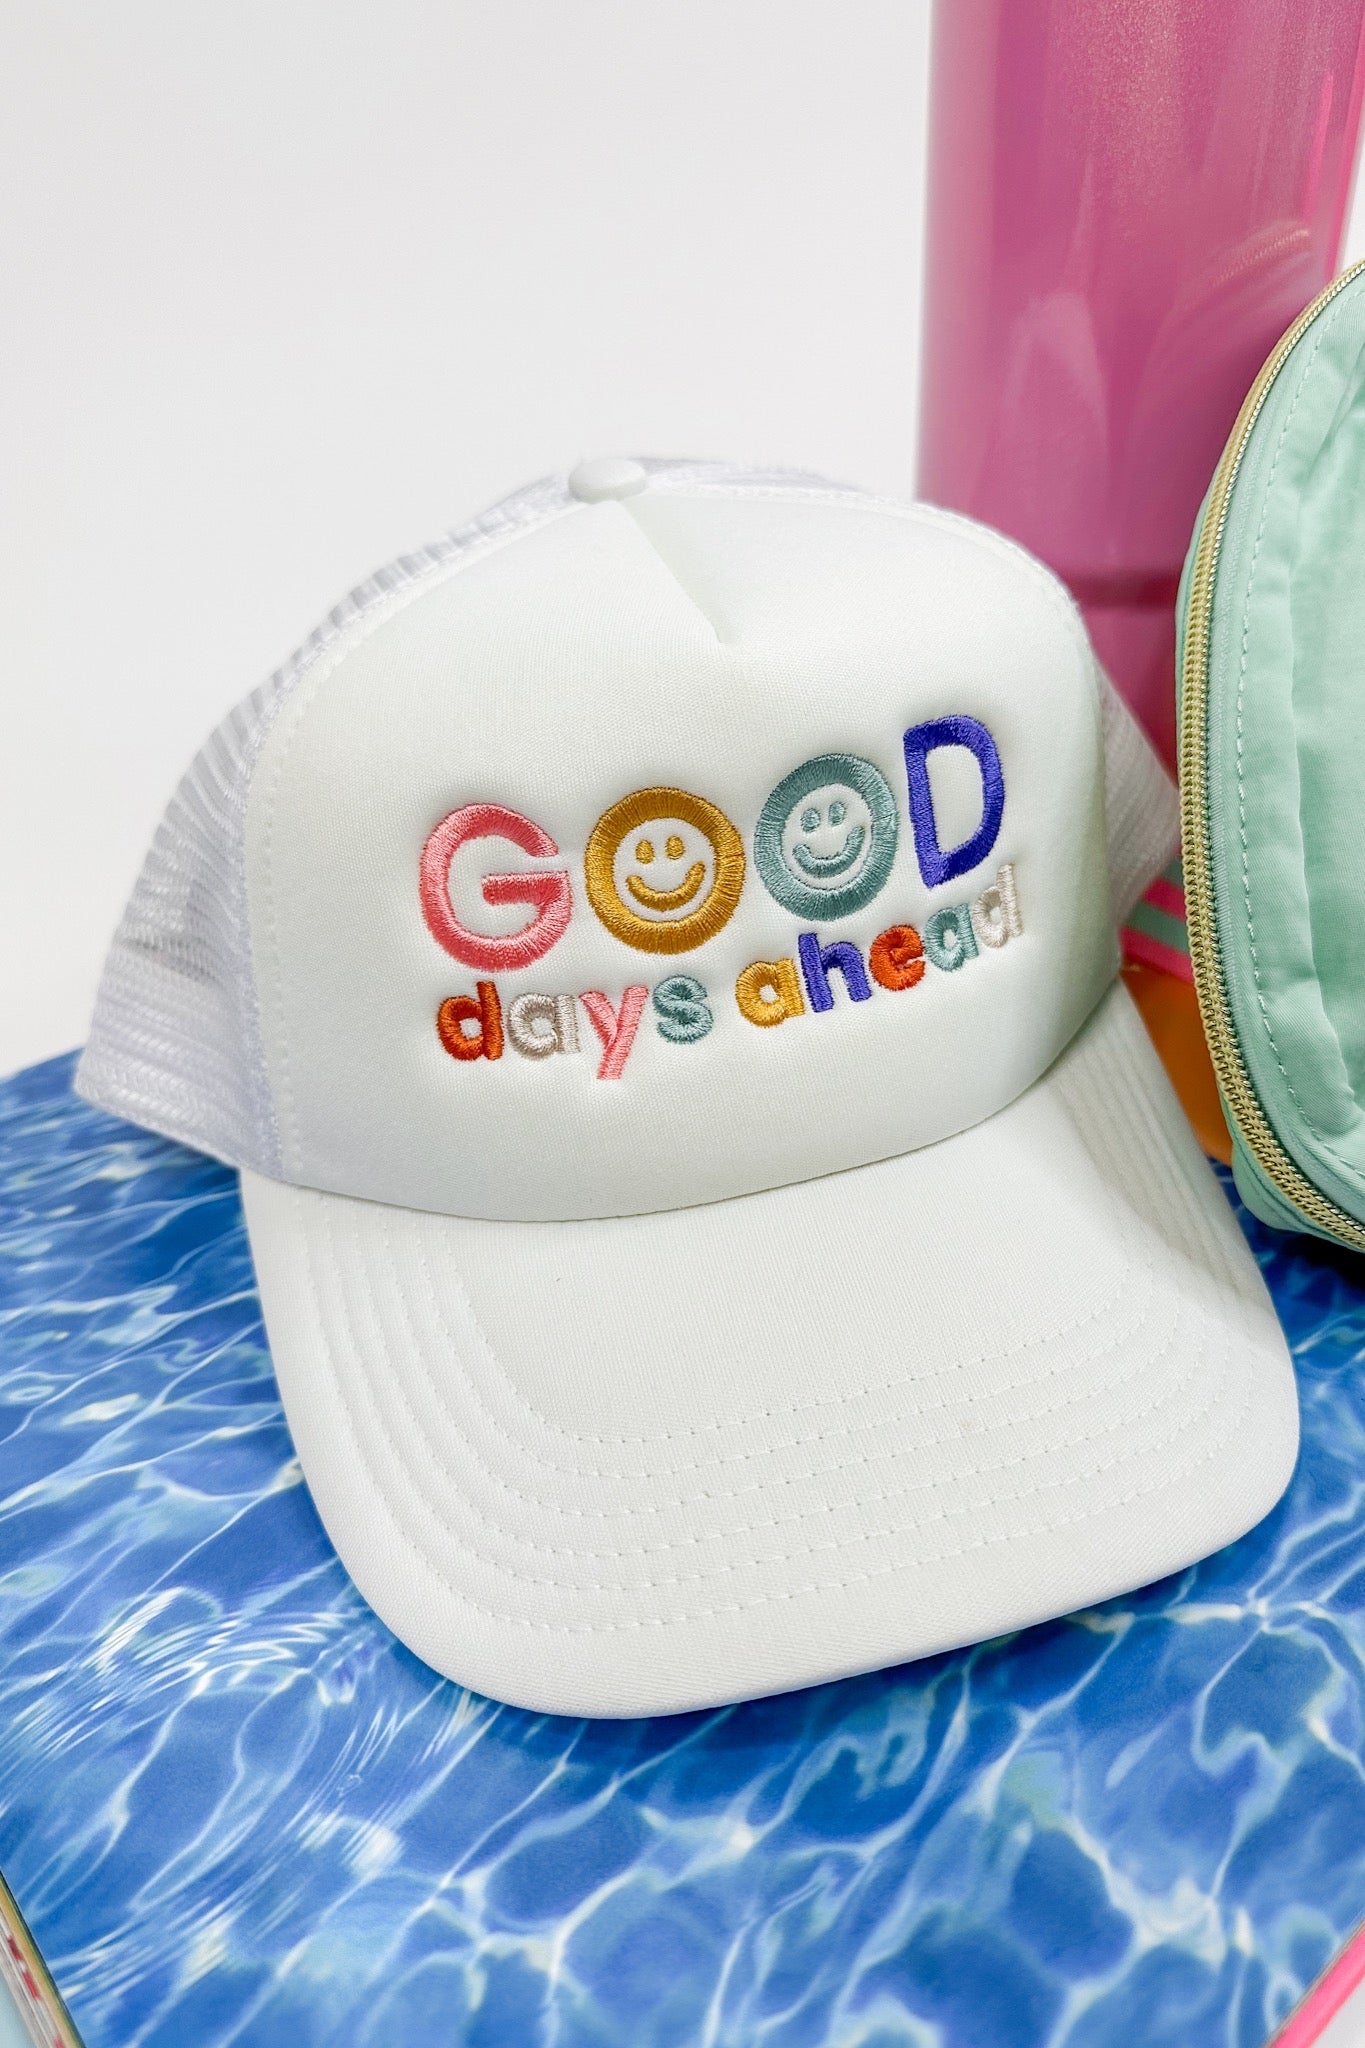 Good Days Ahead Smiley Embroidered White Trucker Hat